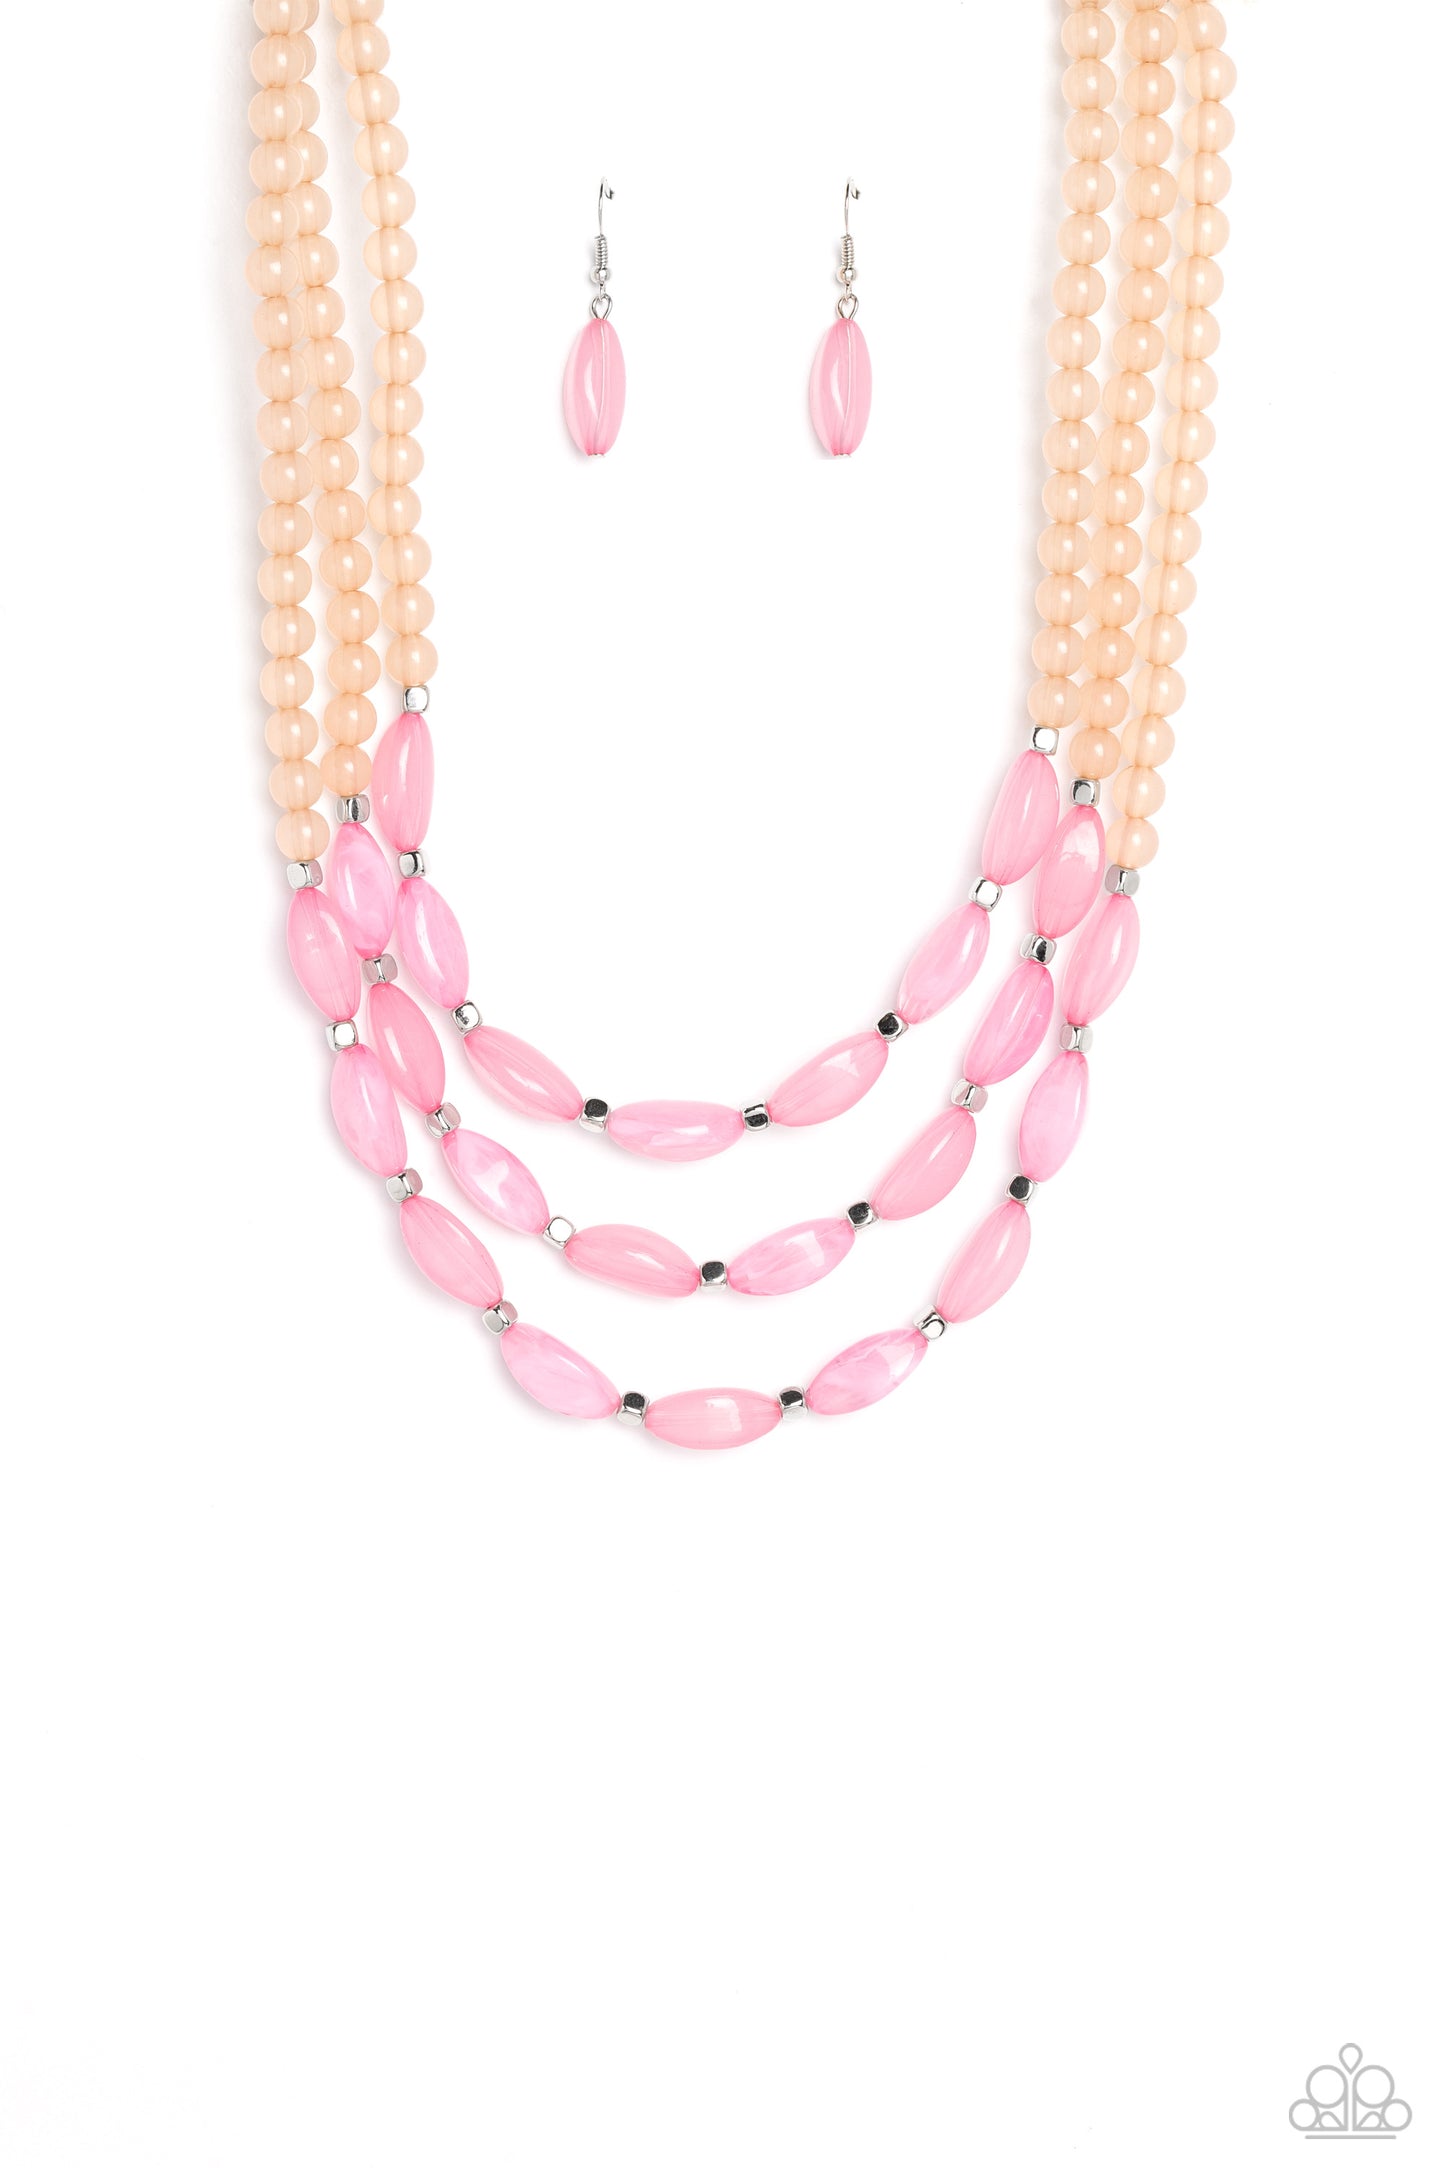 Paparazzi 2 piece set: I BEAD You Now - Pink Necklace & BEAD Drill - Pink Bracelet